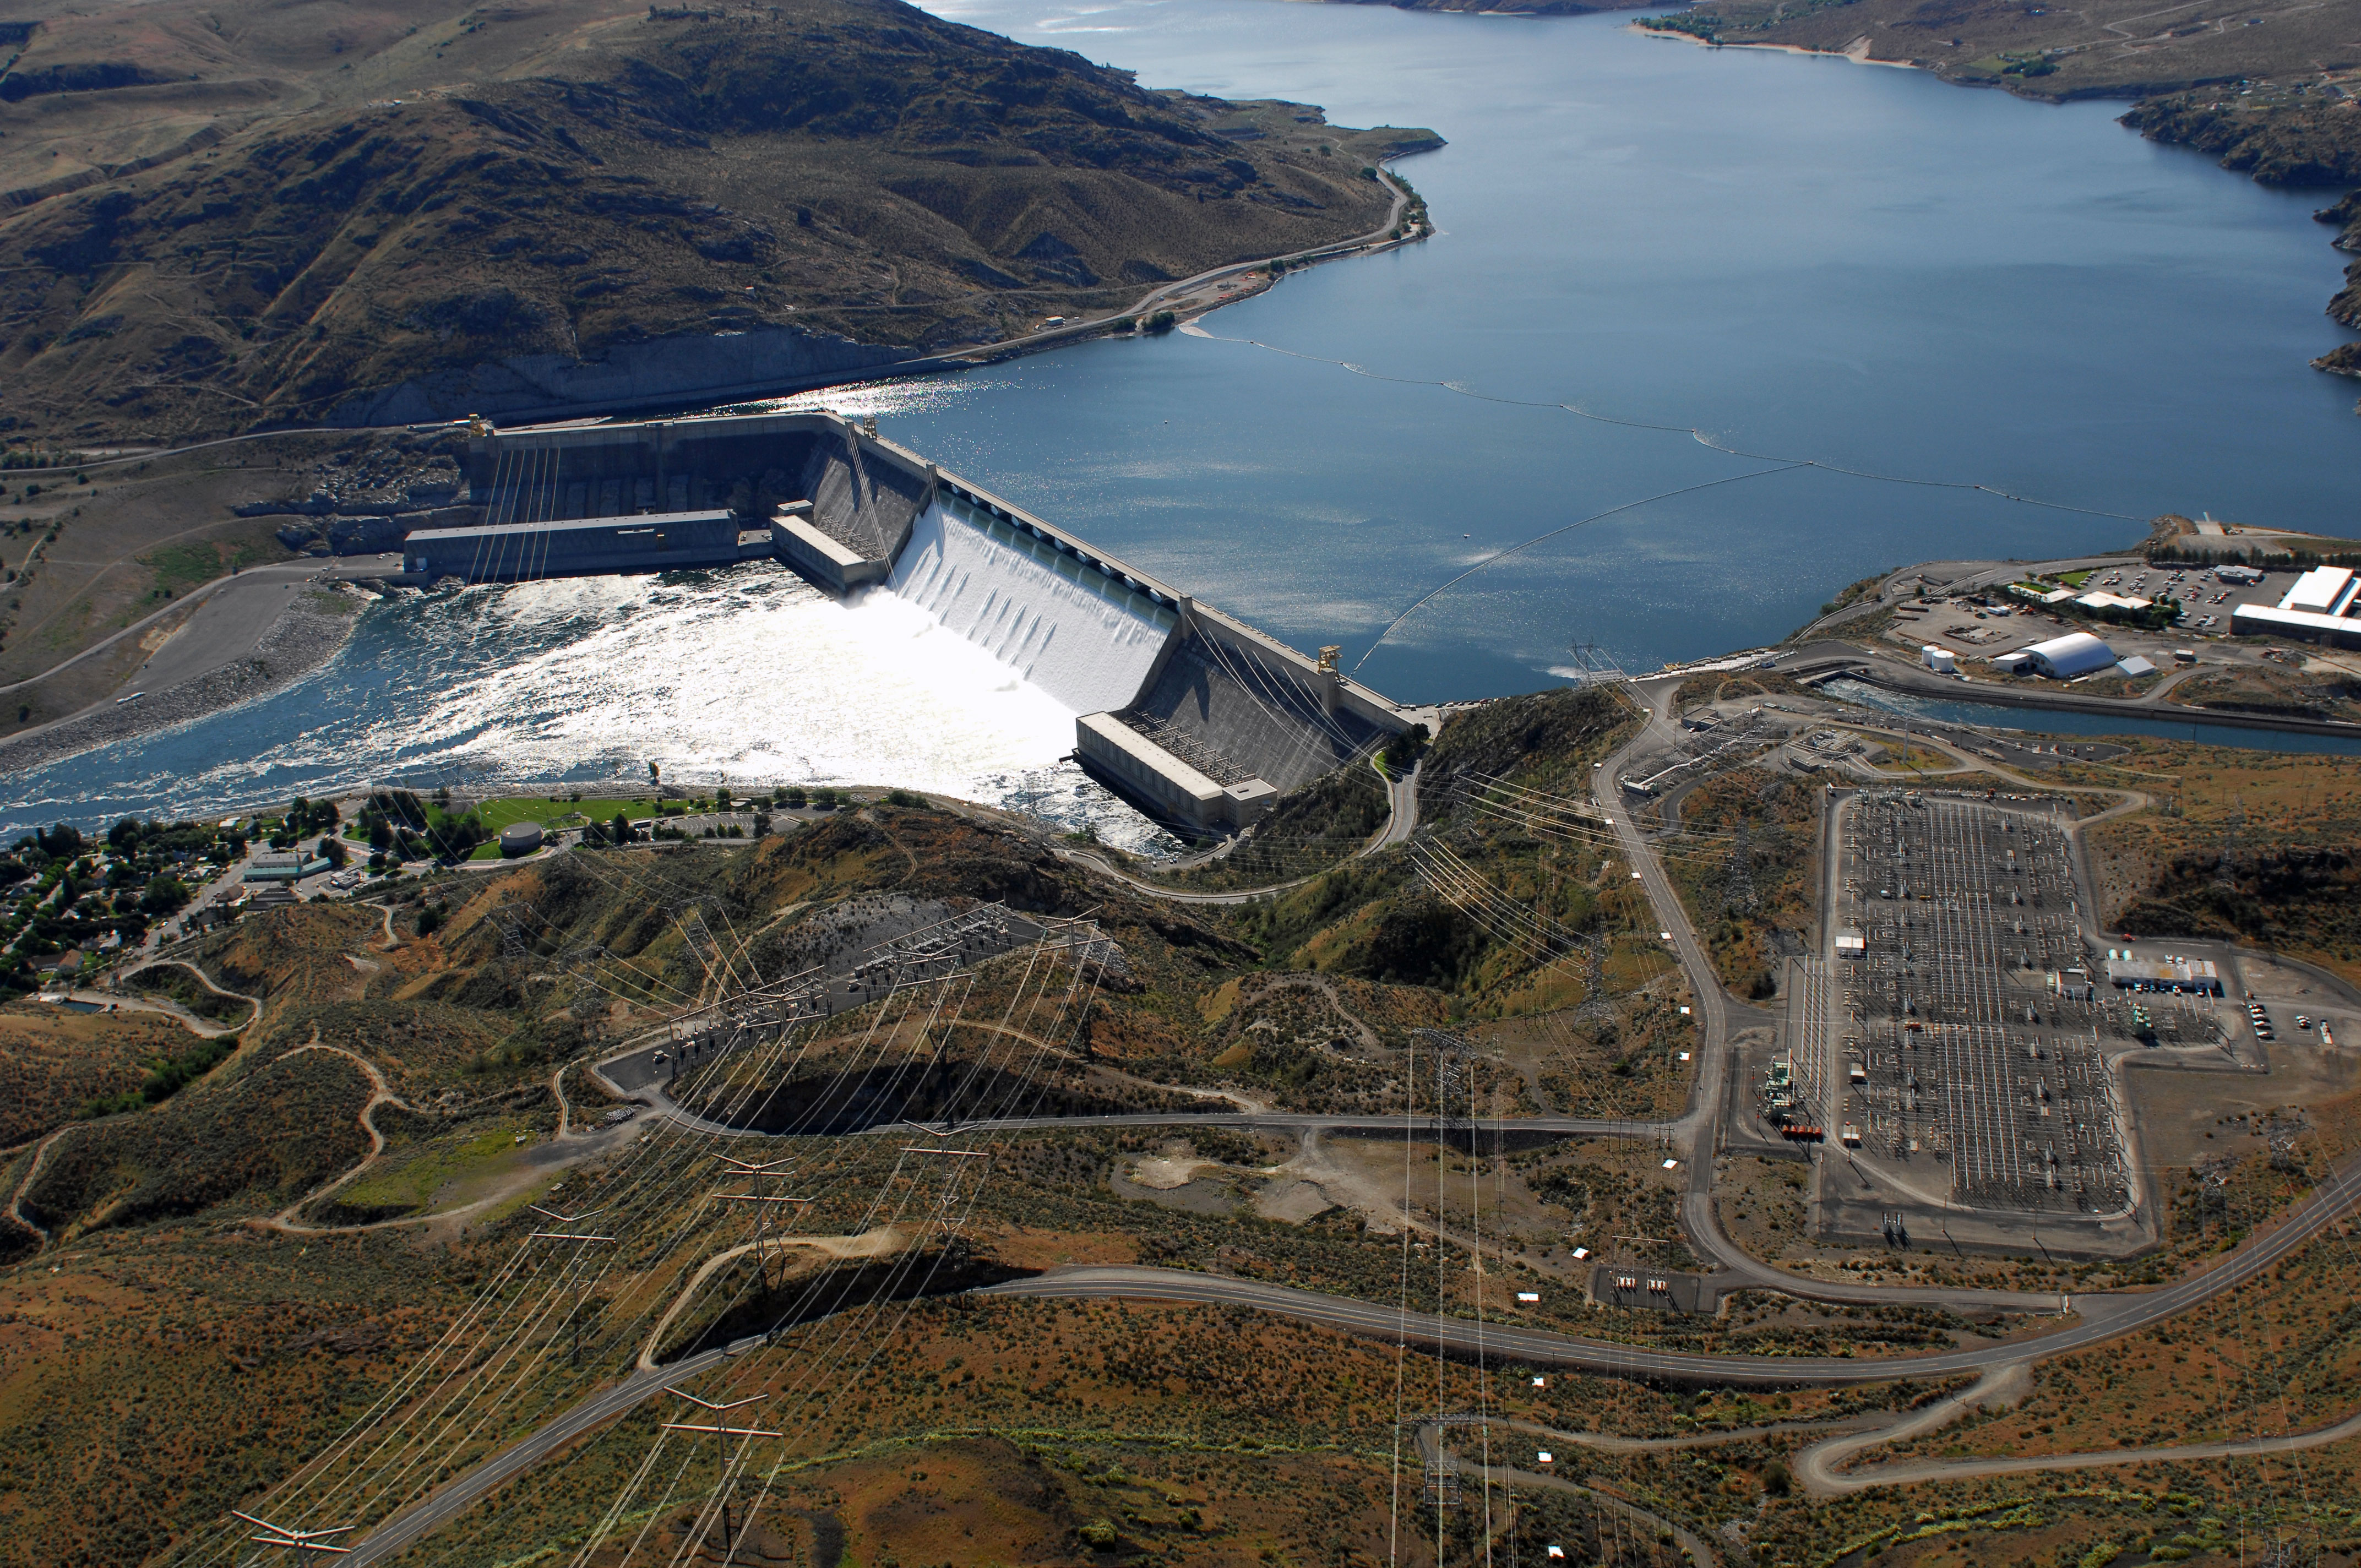 Aerial view of Grand Coulee Dam releasing downstream an unusually large and late spring time water flows of over 200,000 cfs. Broken out, it’s 33,800 cfs, over the spillway and 167,000 cfs through the hydropower generators